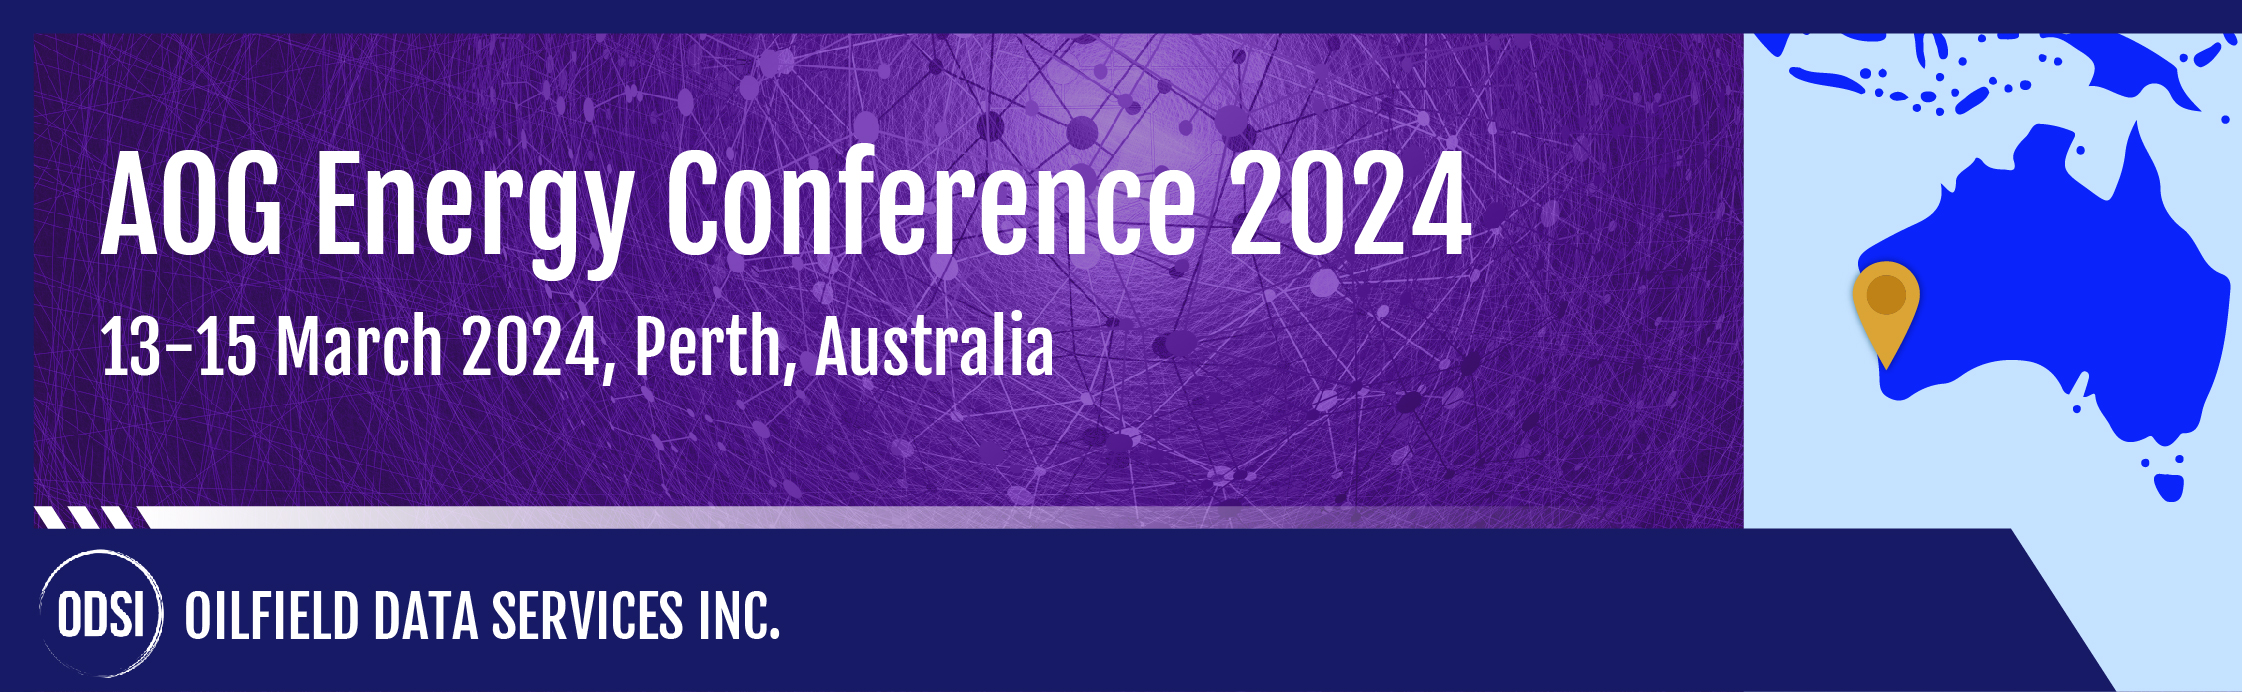 AOG Energy Conference 2024